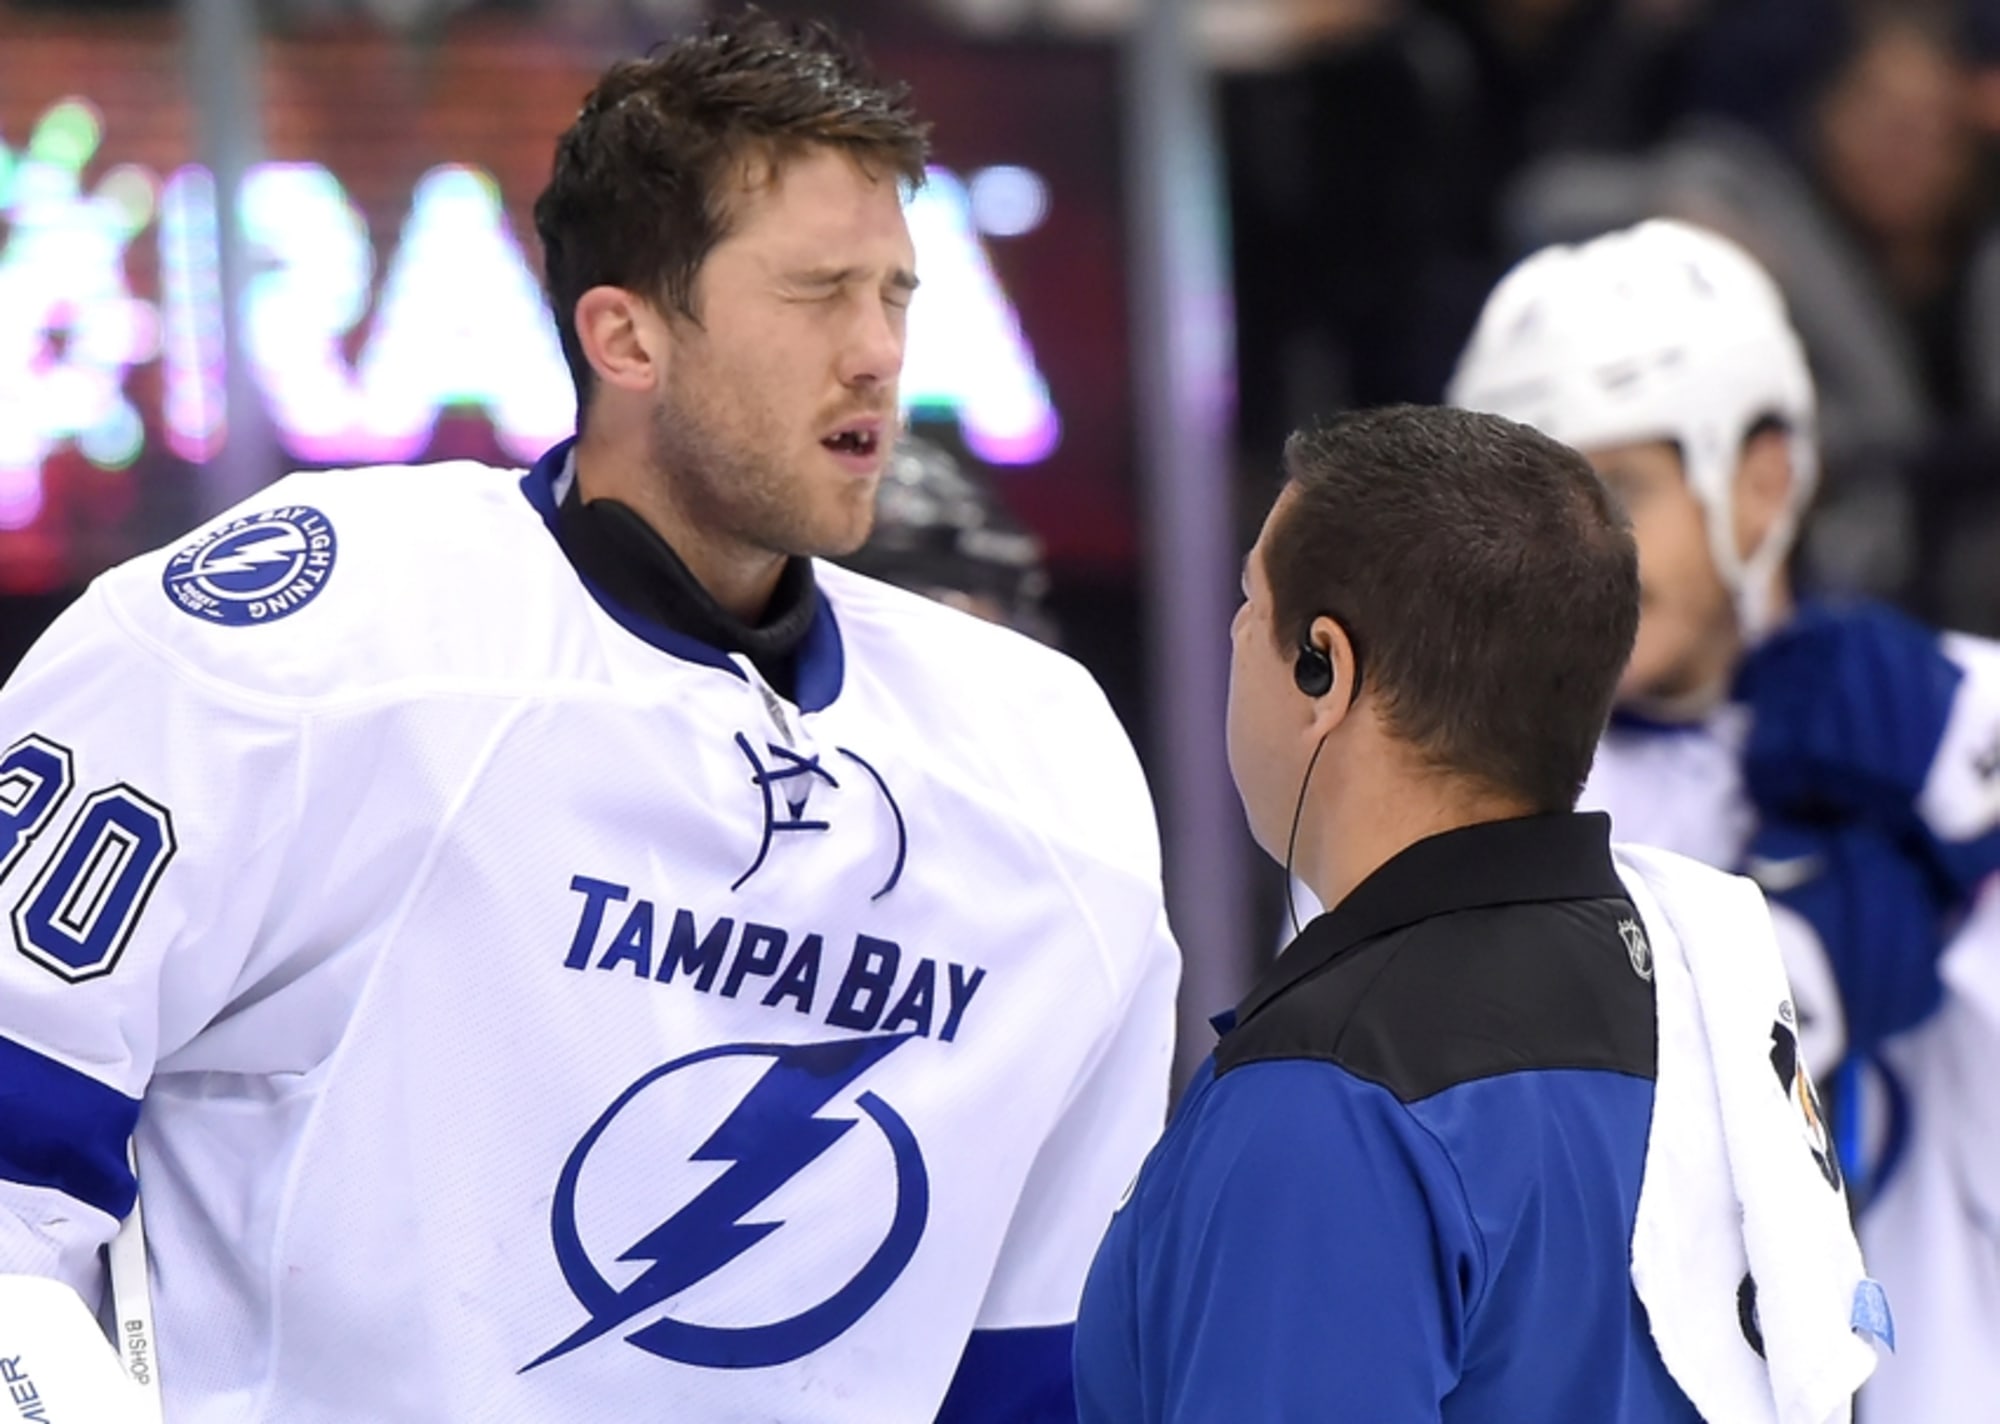 The lapsed fans guide to the 2023-24 Tampa Bay Lightning